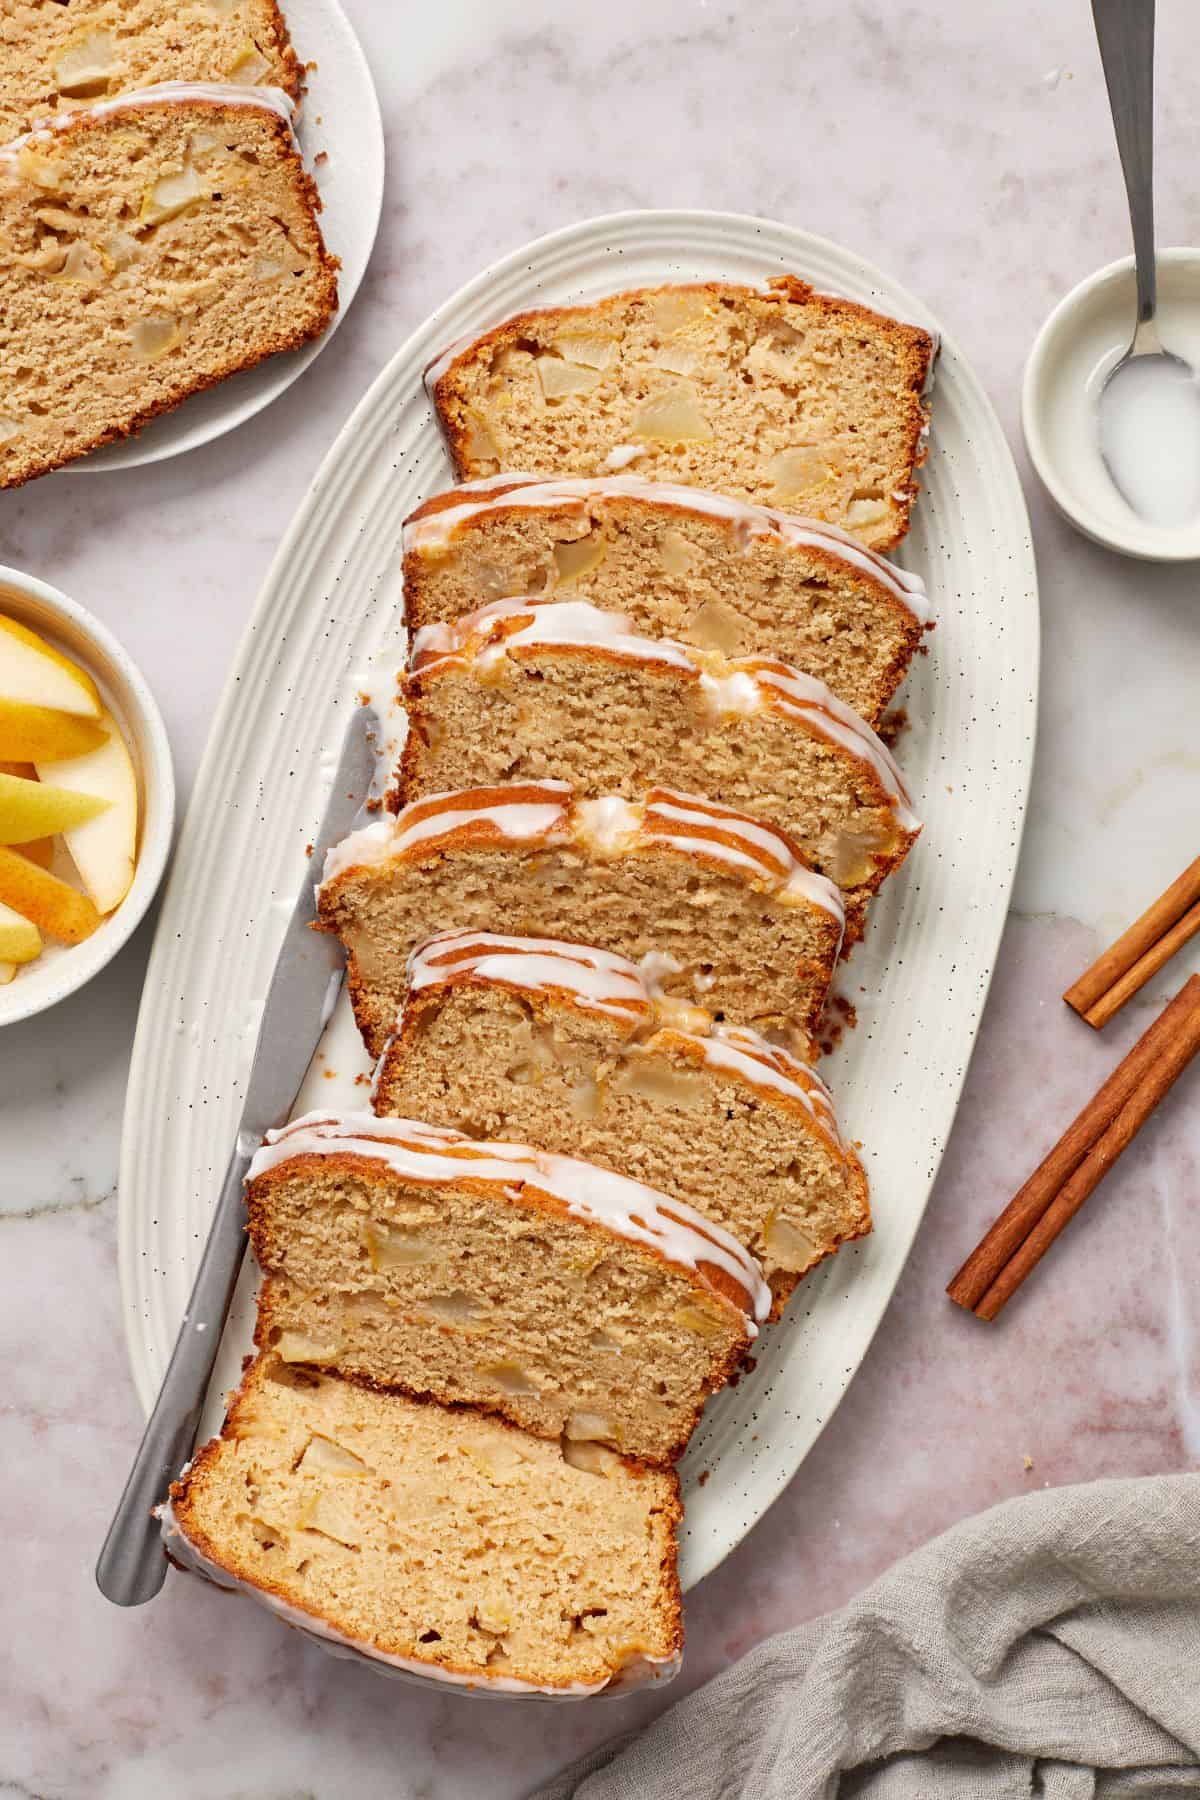 Slices of Pear Loaf Cake on a white oval platter.